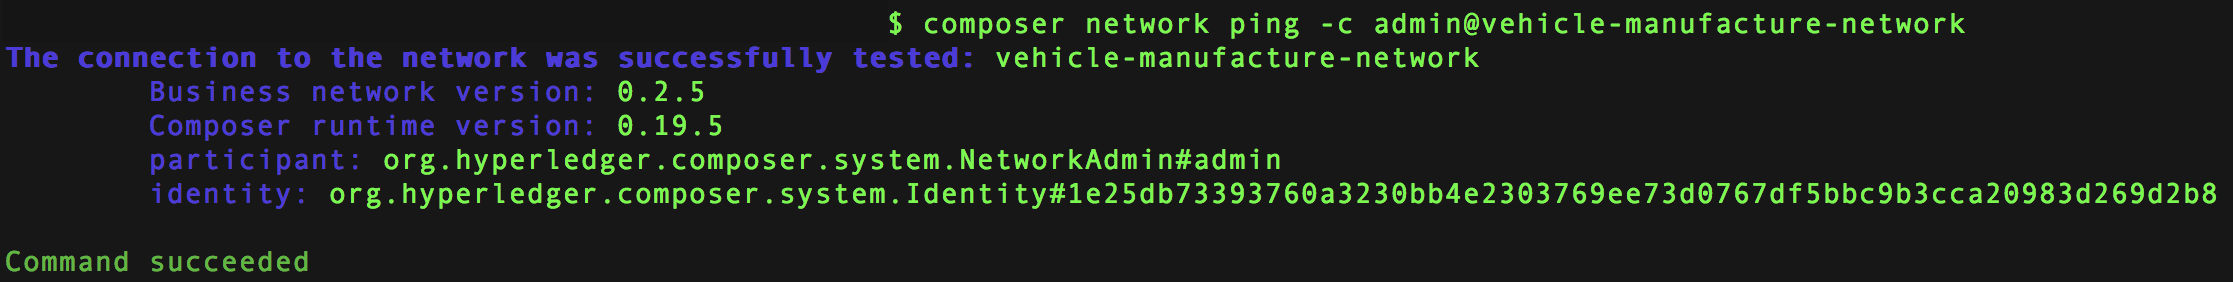 network ping